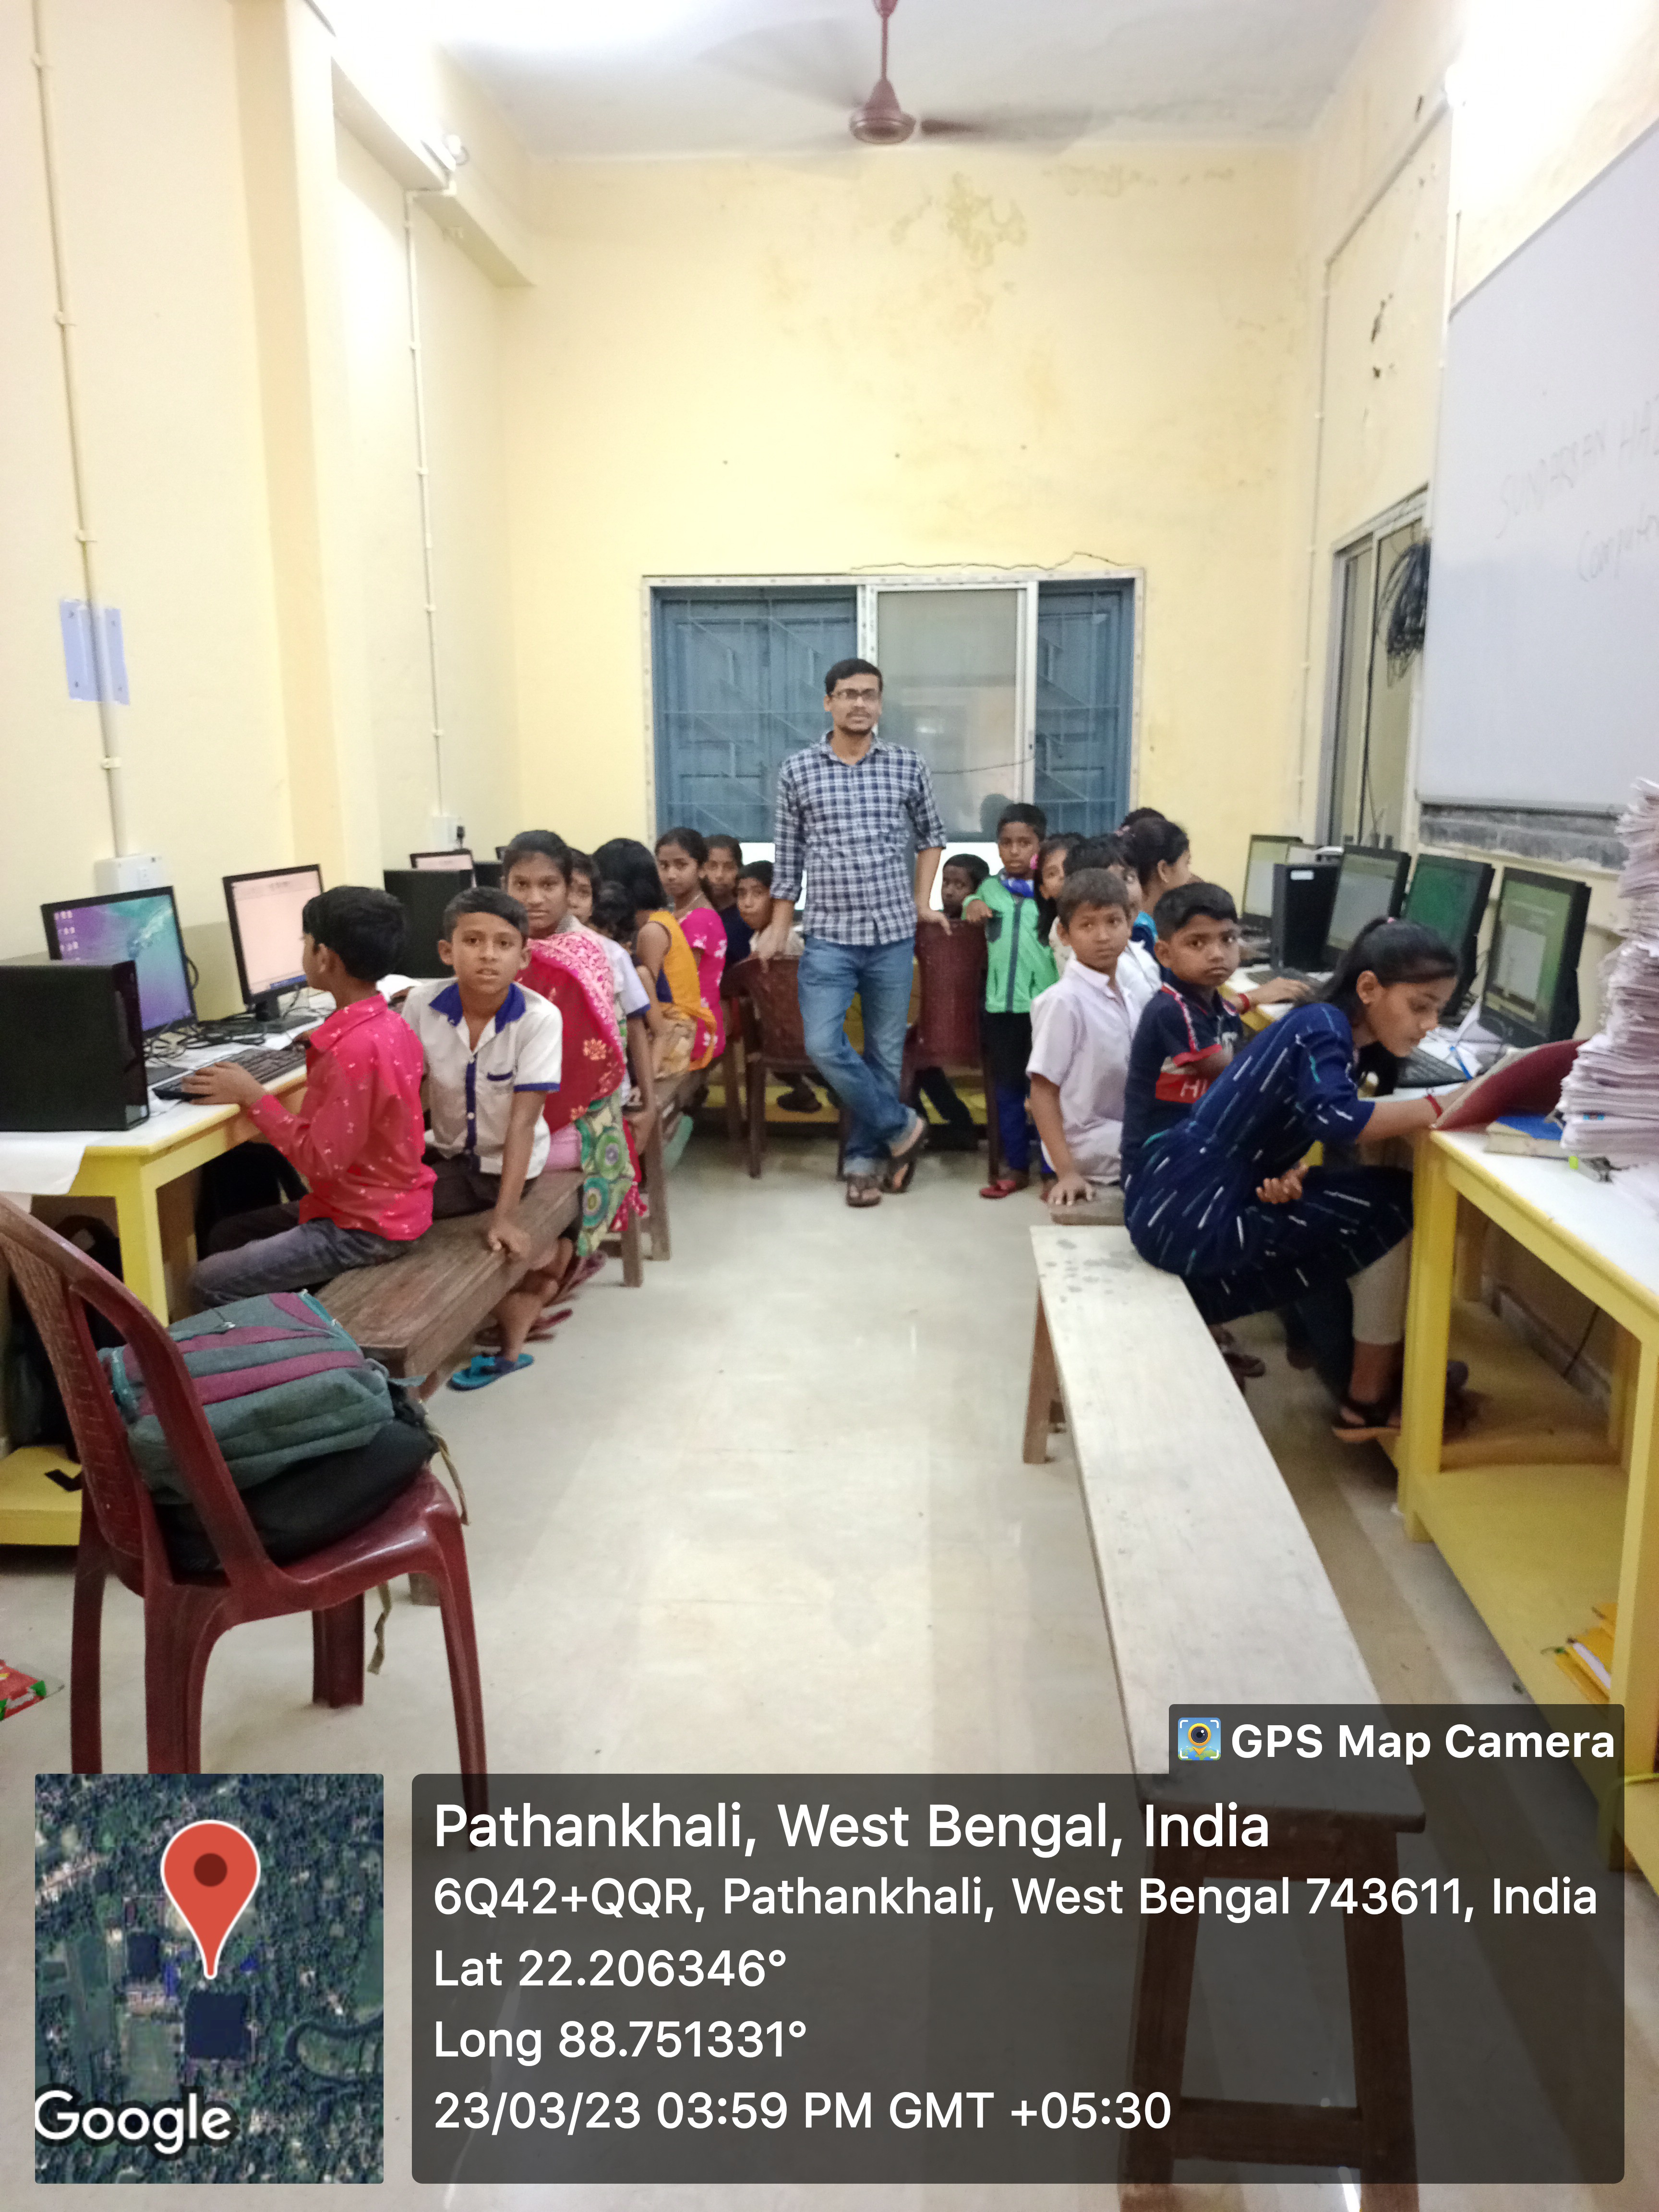 Dept of Mathematics support and help local school students for Basic computer training in the college computer lab.